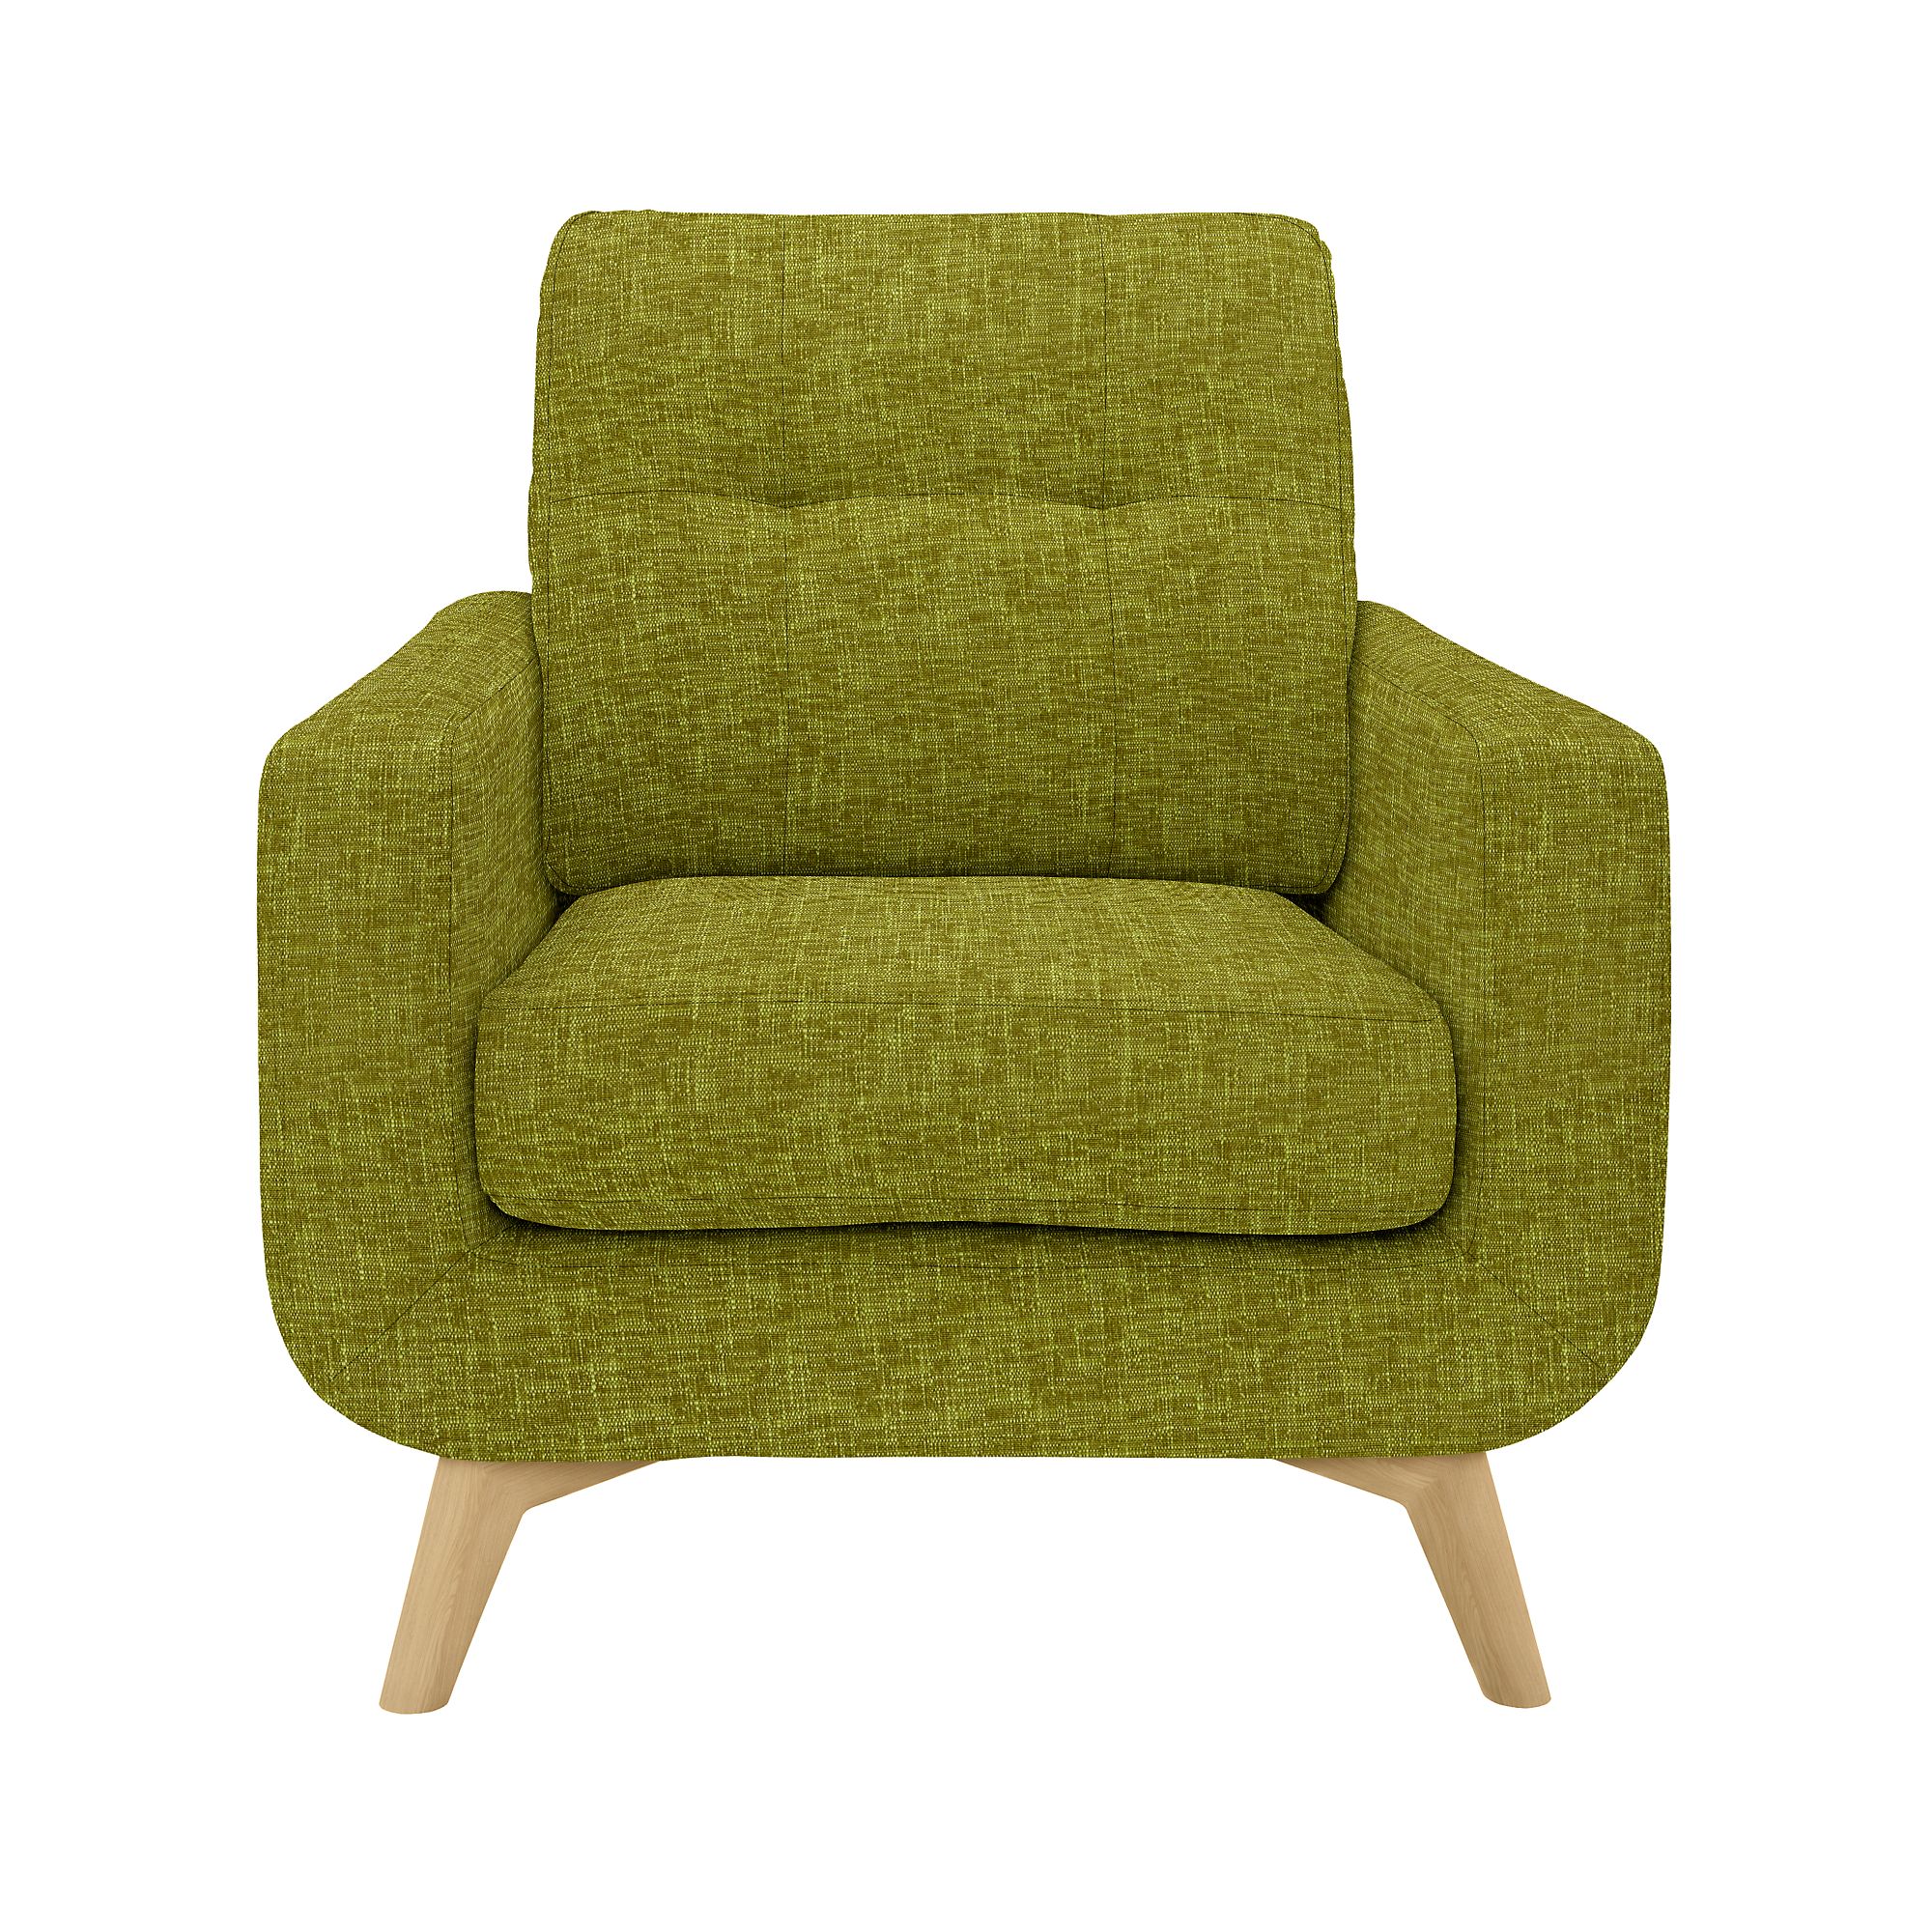 John Lewis Barbican Armchair with Light Legs,